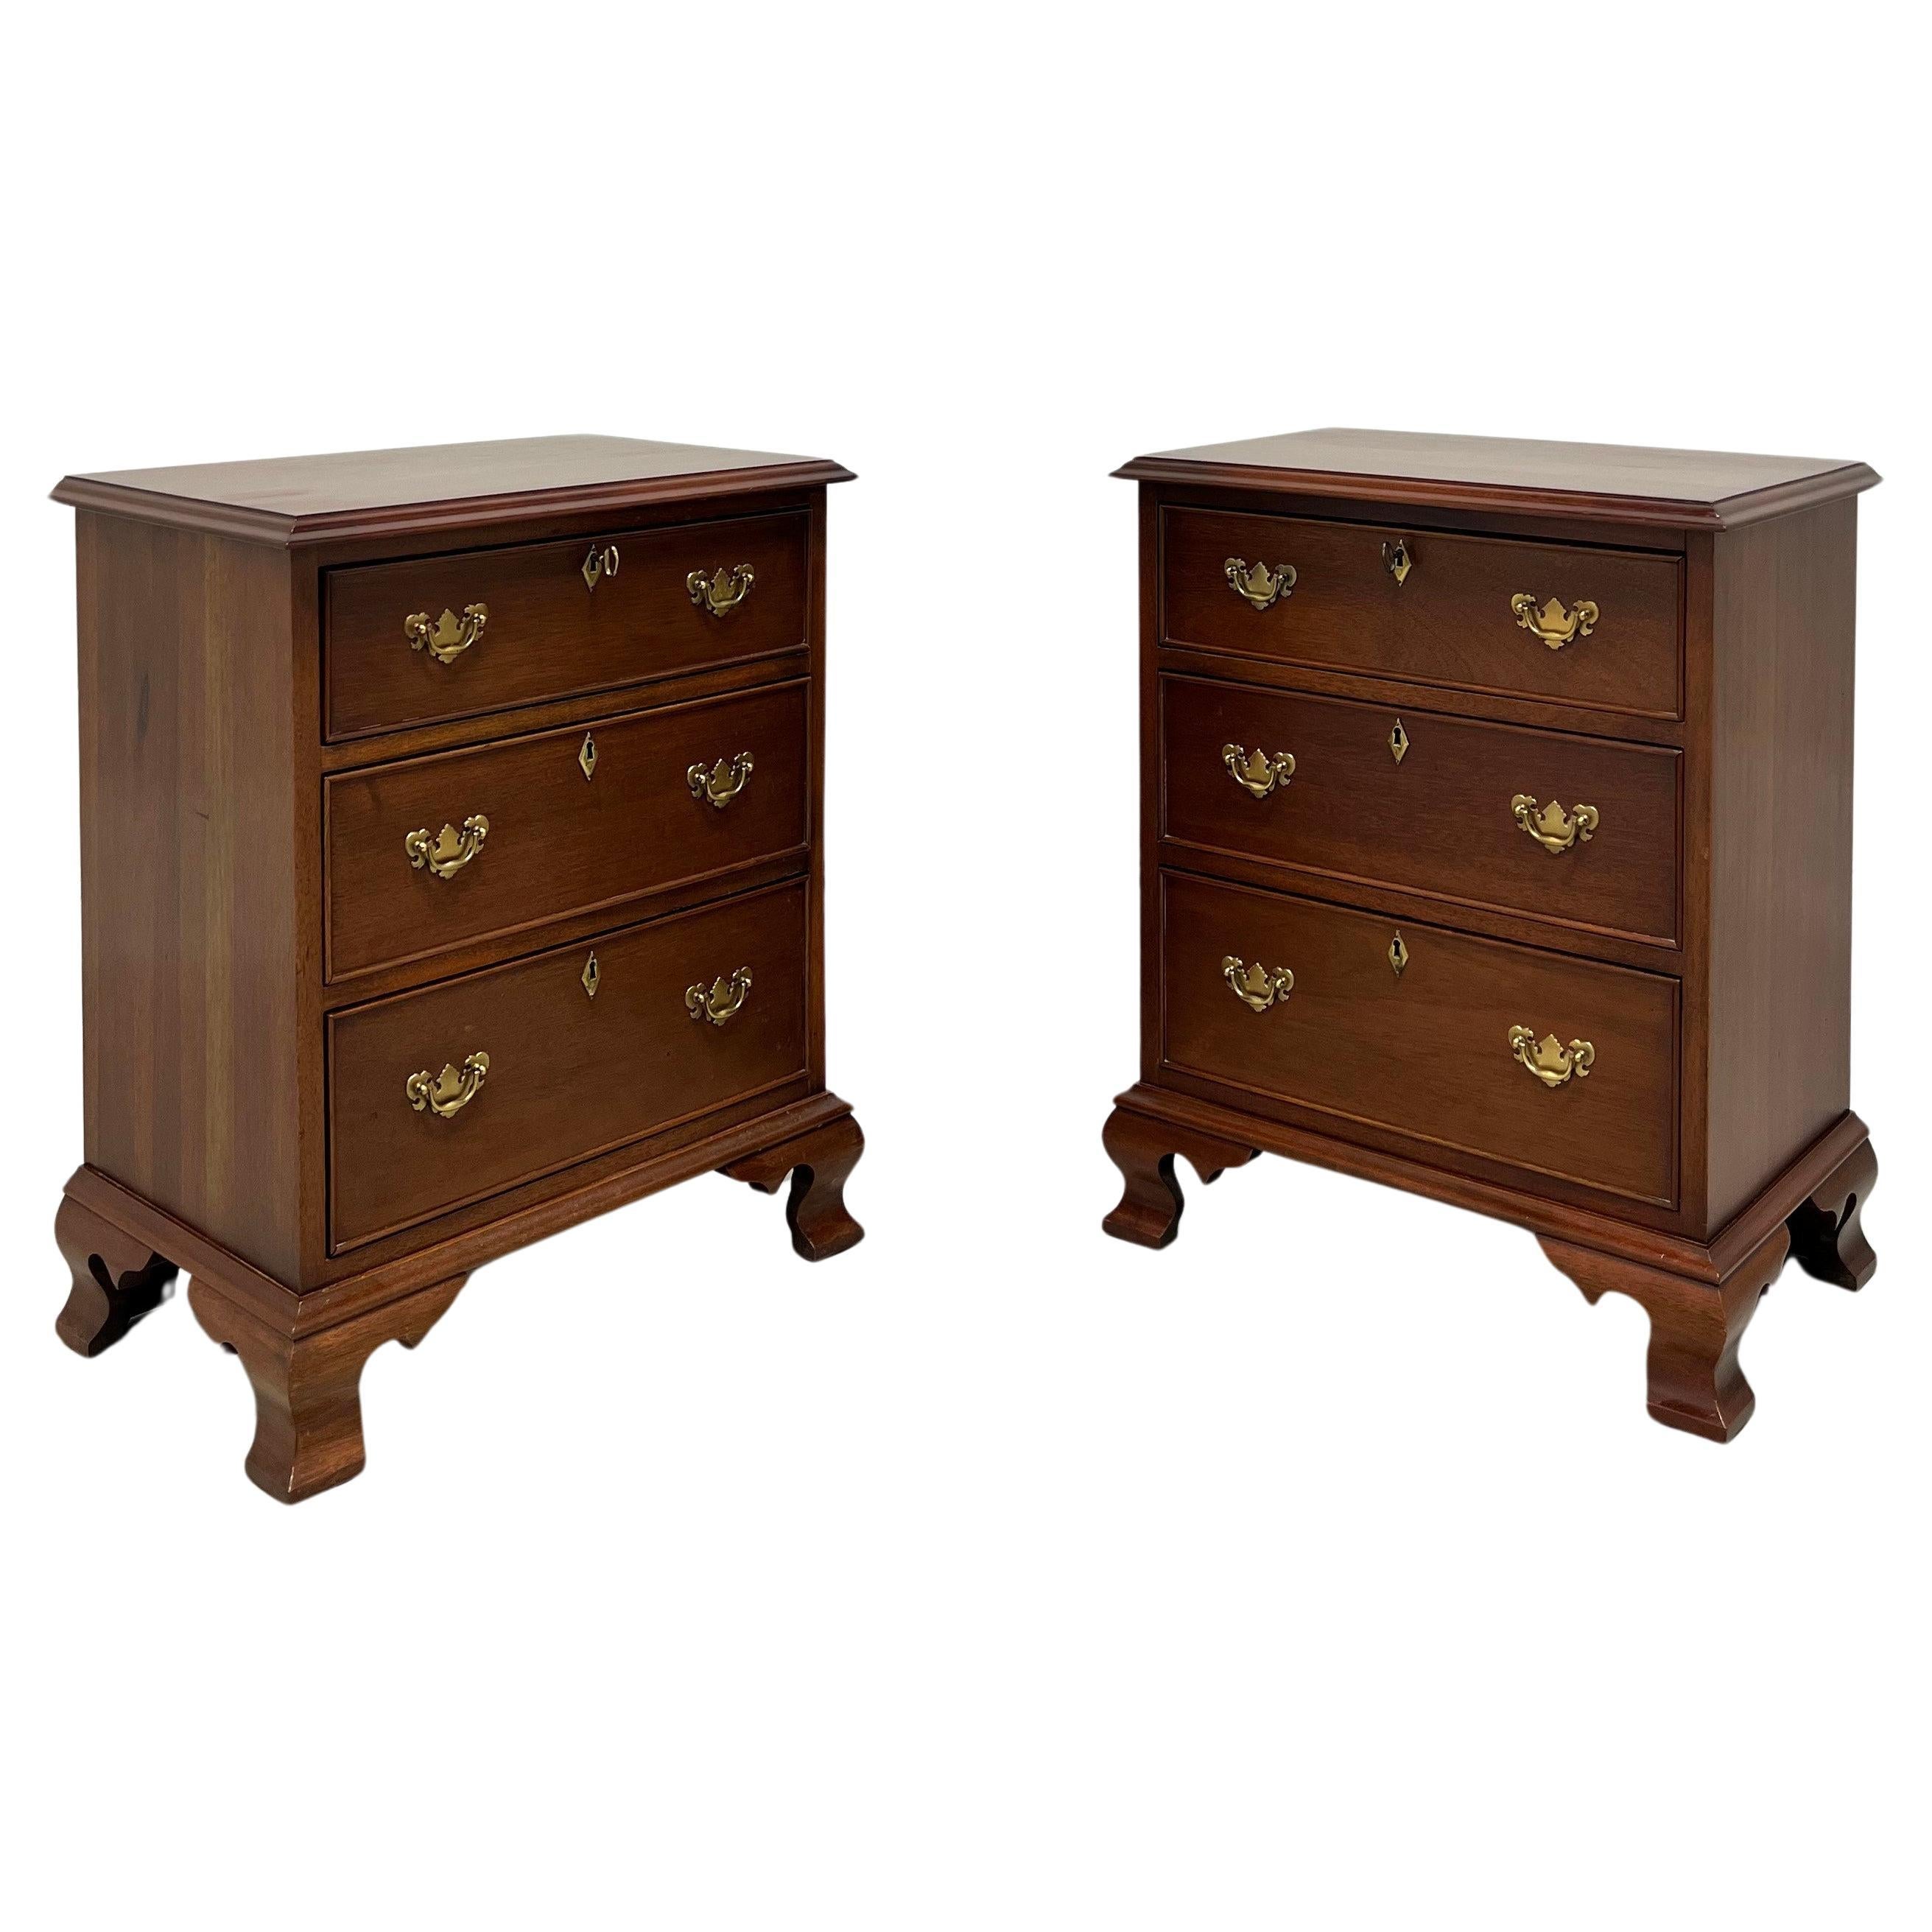 CRAFTIQUE Solid Mahogany Chippendale Style Three-Drawer Nightstands - Pair For Sale